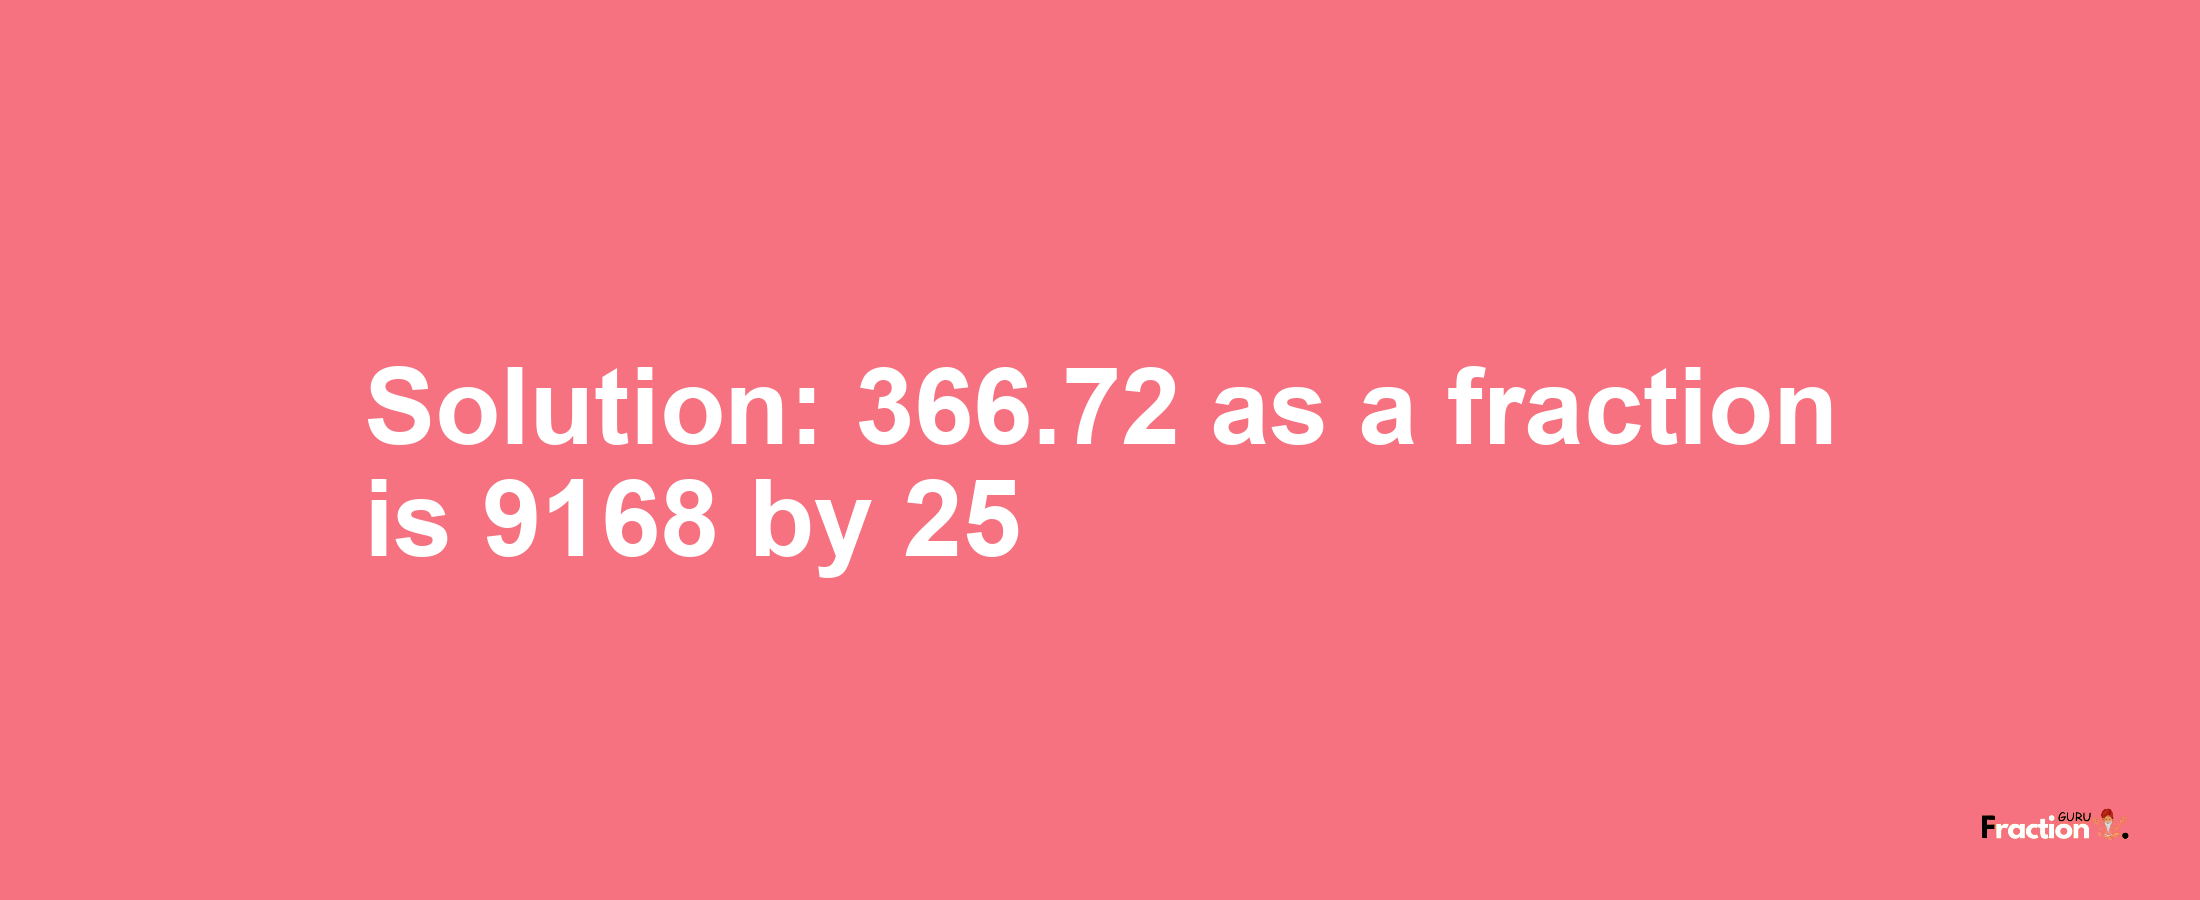 Solution:366.72 as a fraction is 9168/25